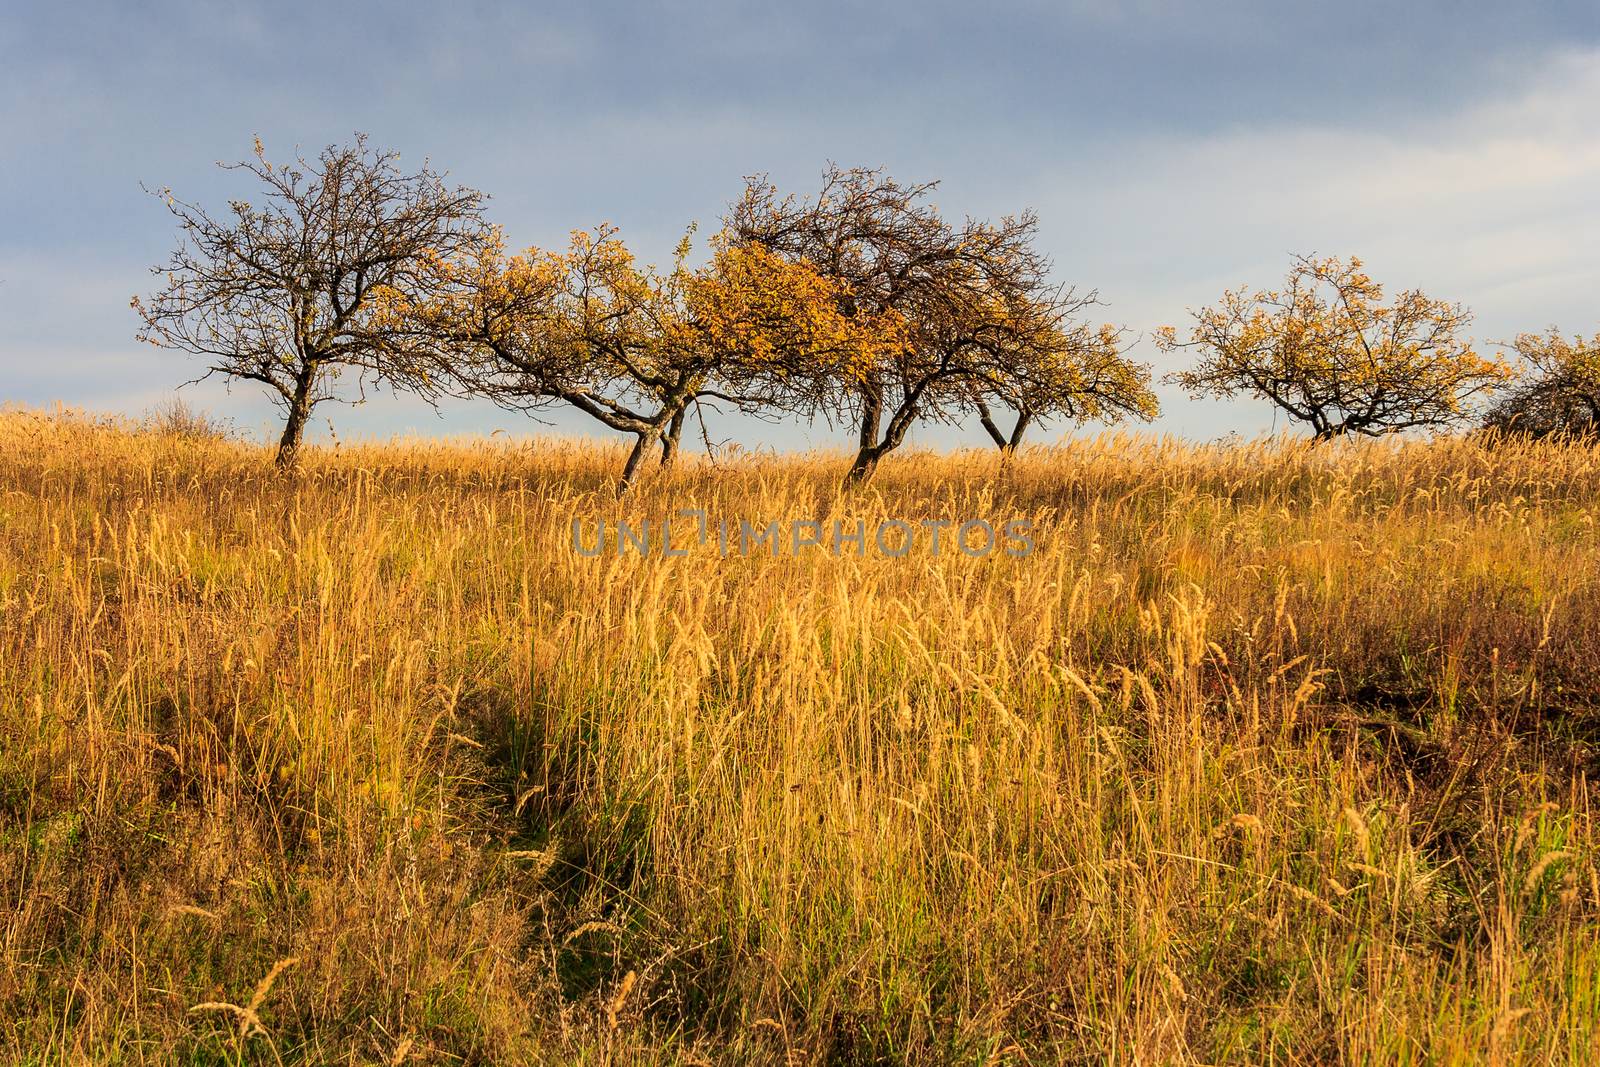 dry autumn trees and grass under a heavy gray sky by Pellinni